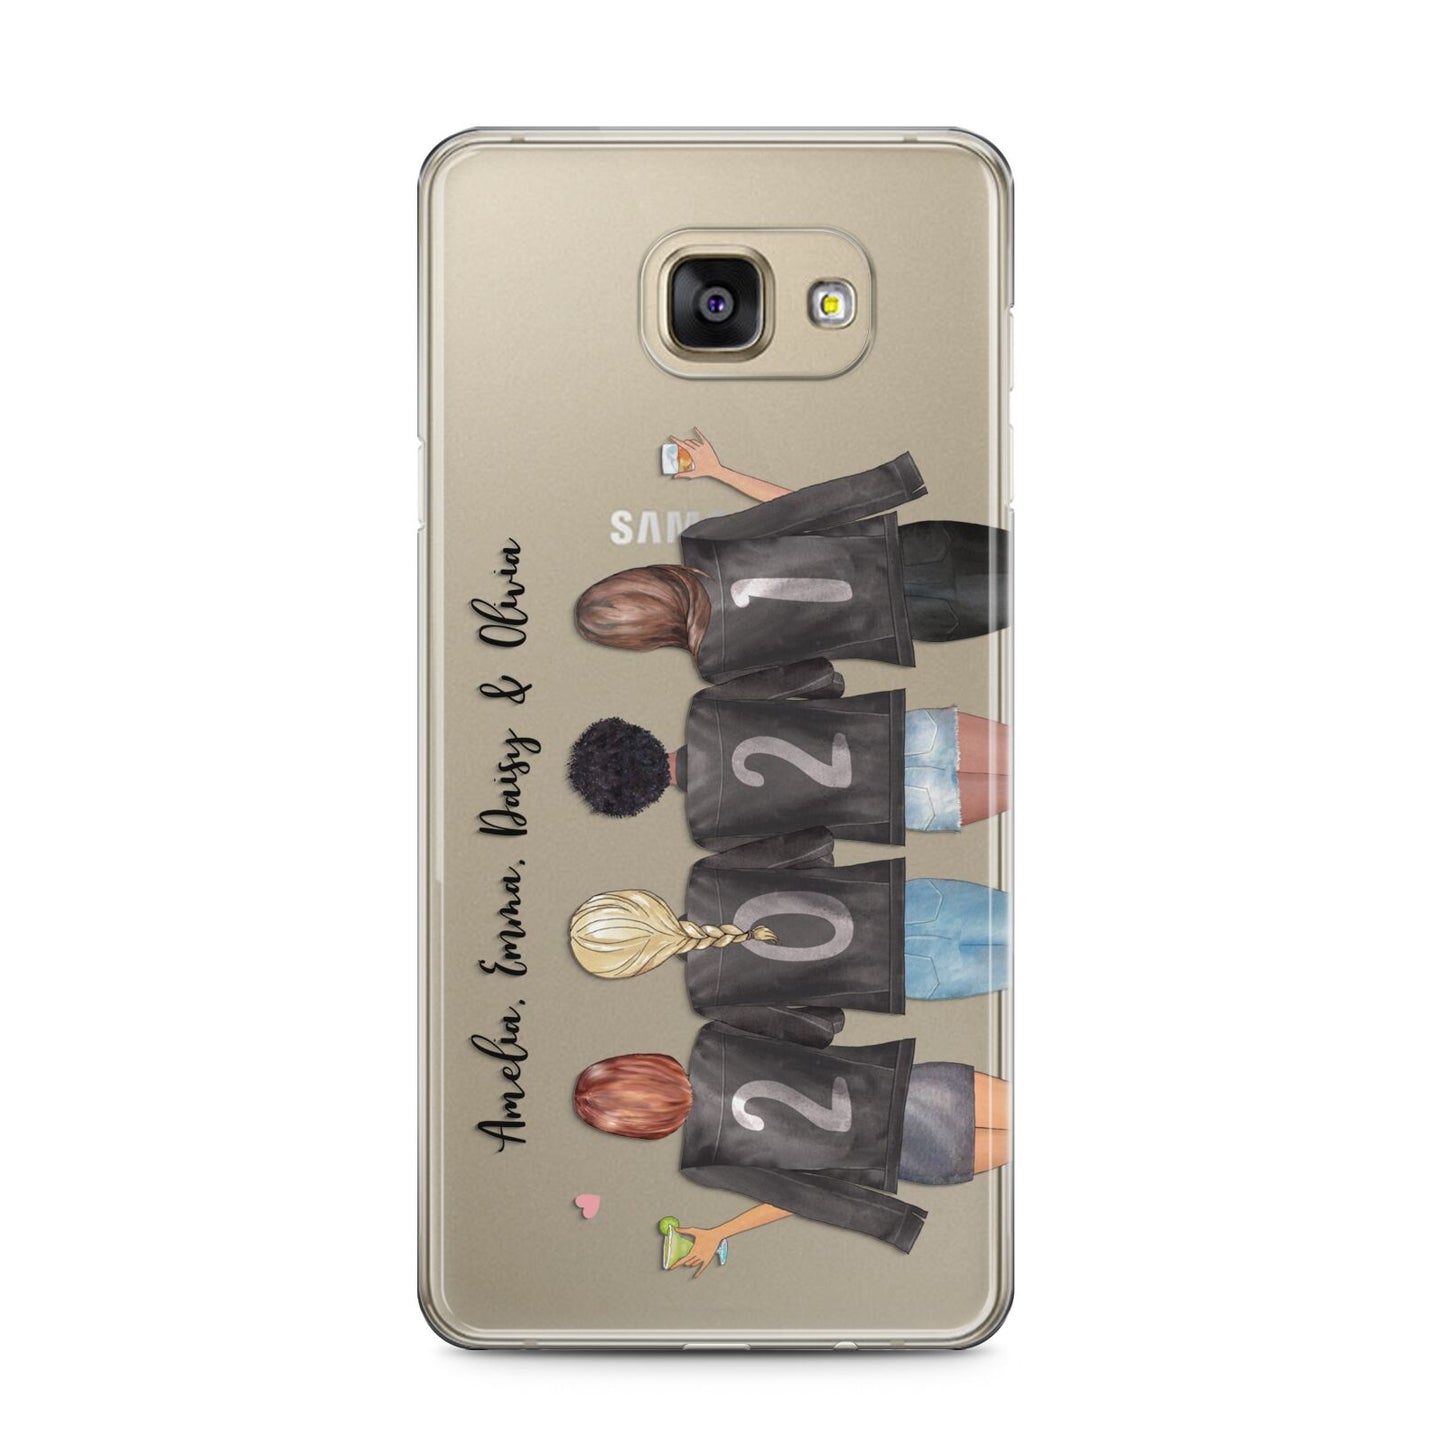 4 Best Friends with Names Samsung Galaxy A5 2016 Case on gold phone